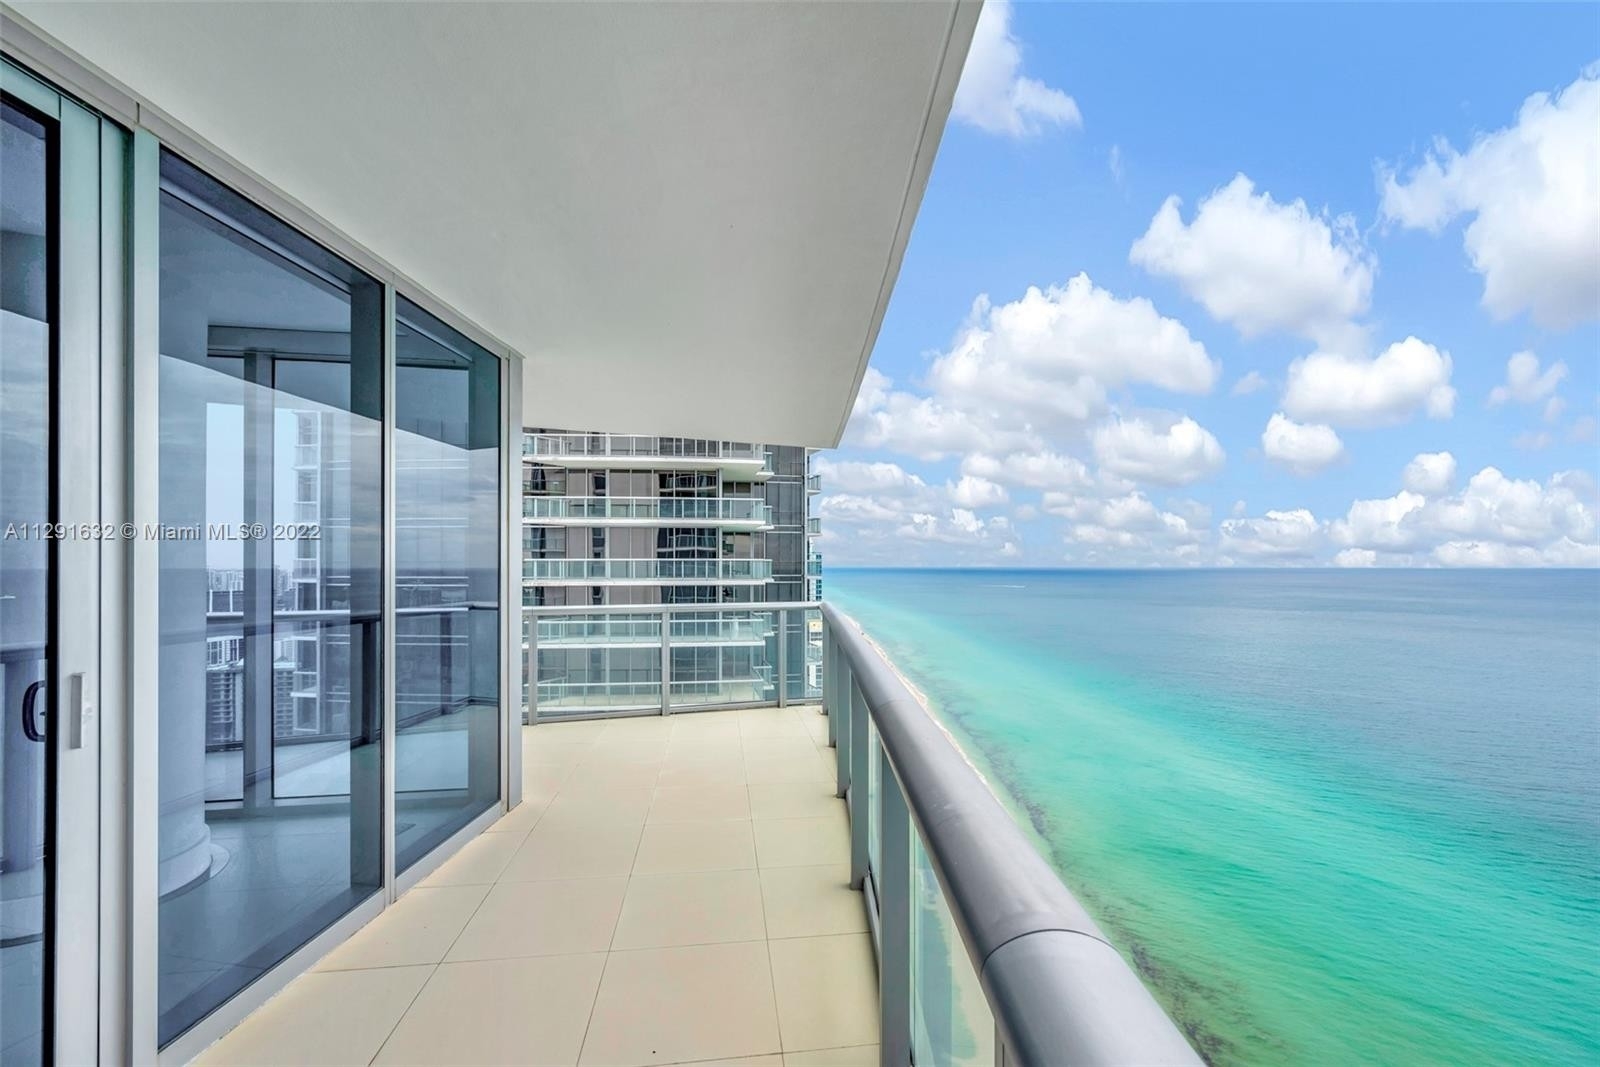 31. Condominiums for Sale at 17001 Collins Ave , 3908 Sunny Isles Beach, FL 33160